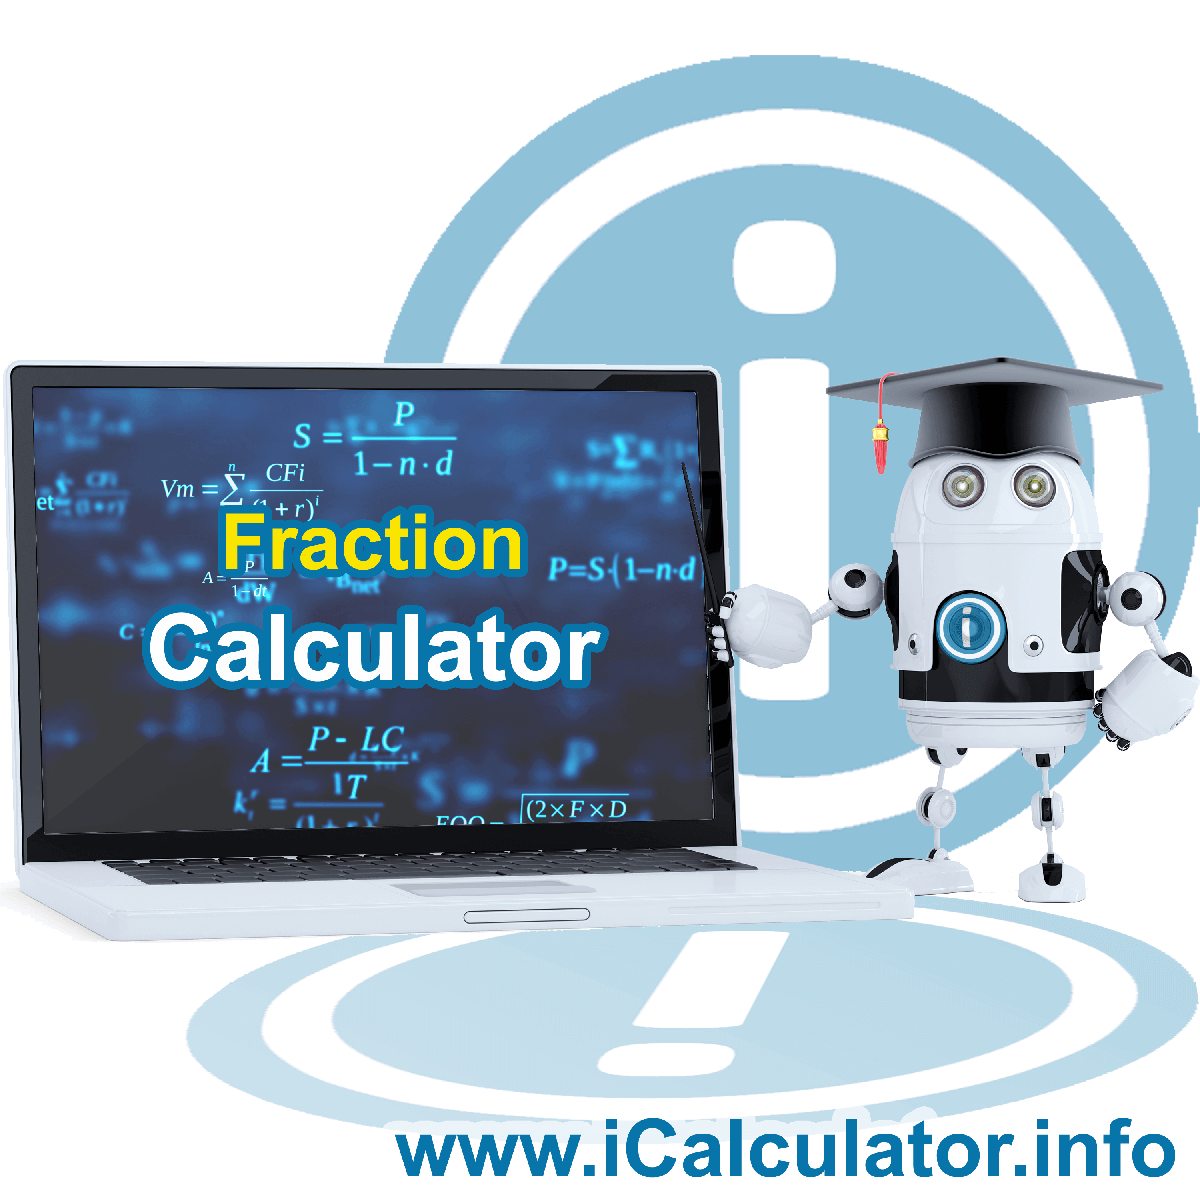 Fraction Calculator: This image show the calculator robot pointing to a screen with the formula for calculating fractions manually using fraction formulas.